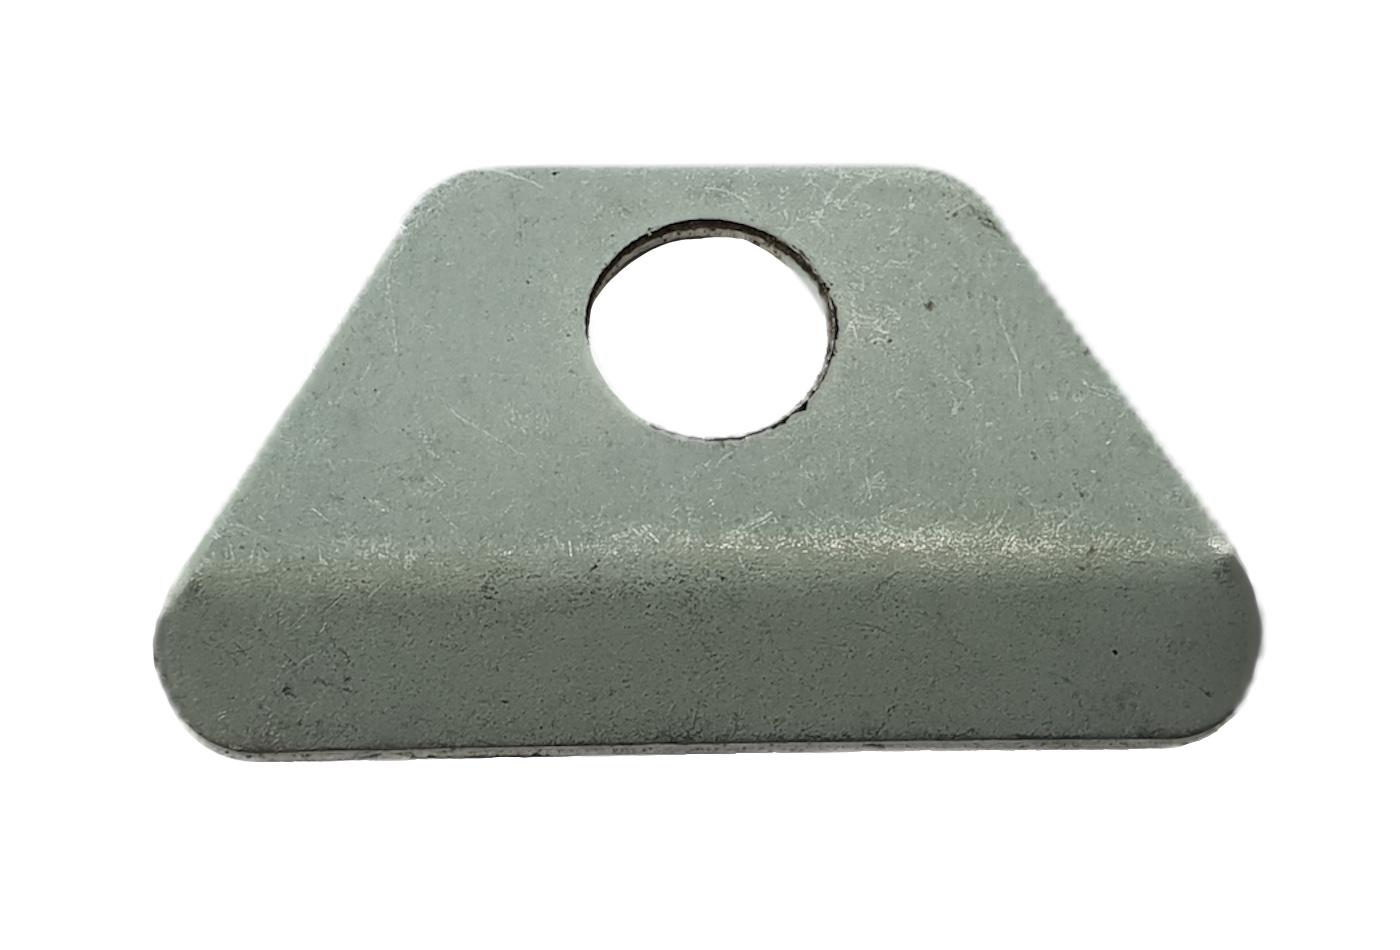 A glass clip and screw suitable for a variety of Aarrow stoves by Stove Industry Supplies.